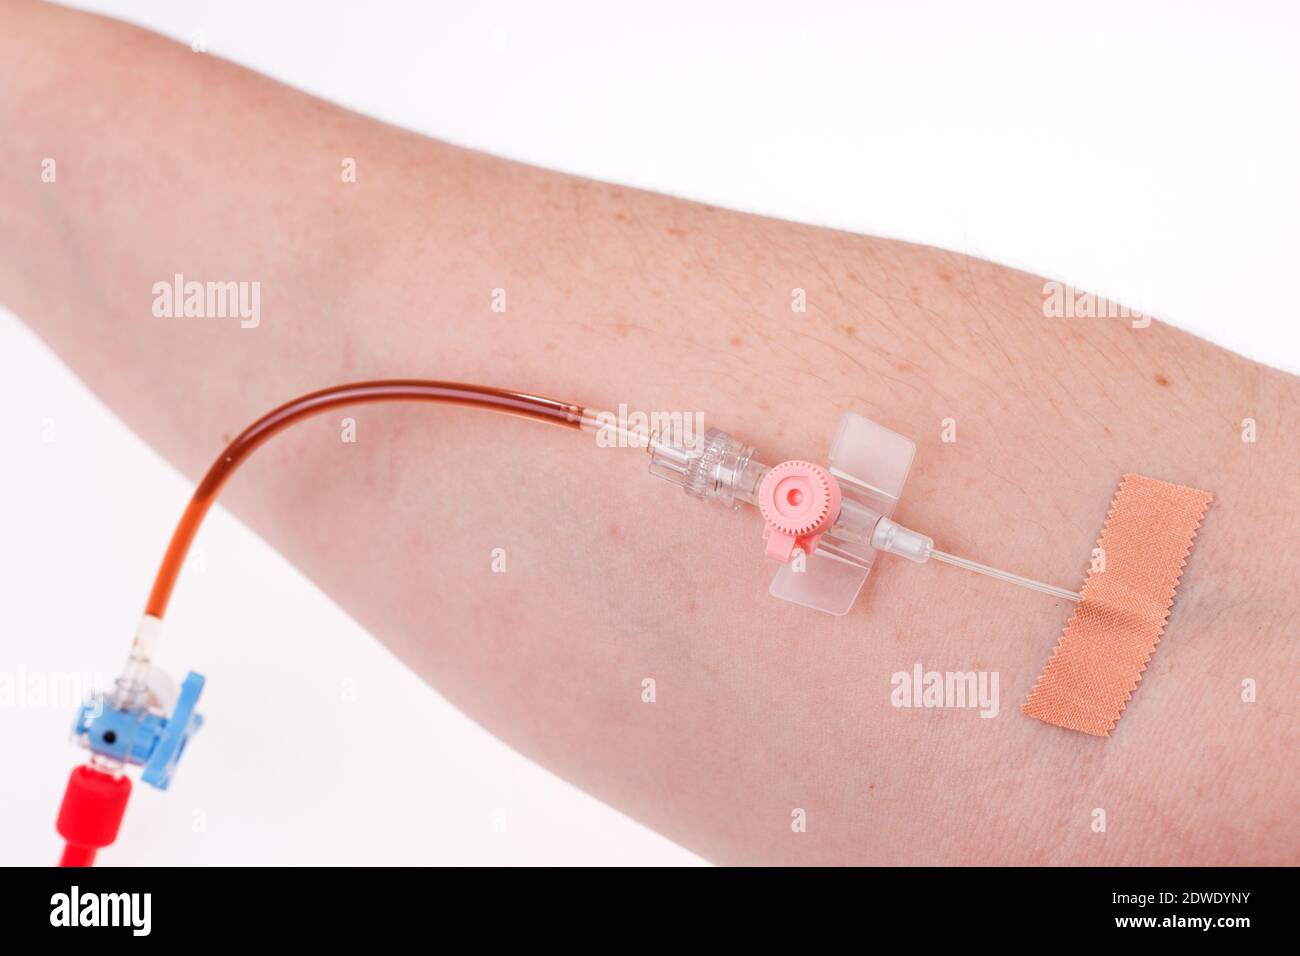 Cropped Hand Of Person Donating Blood Against White Background Stock Photo